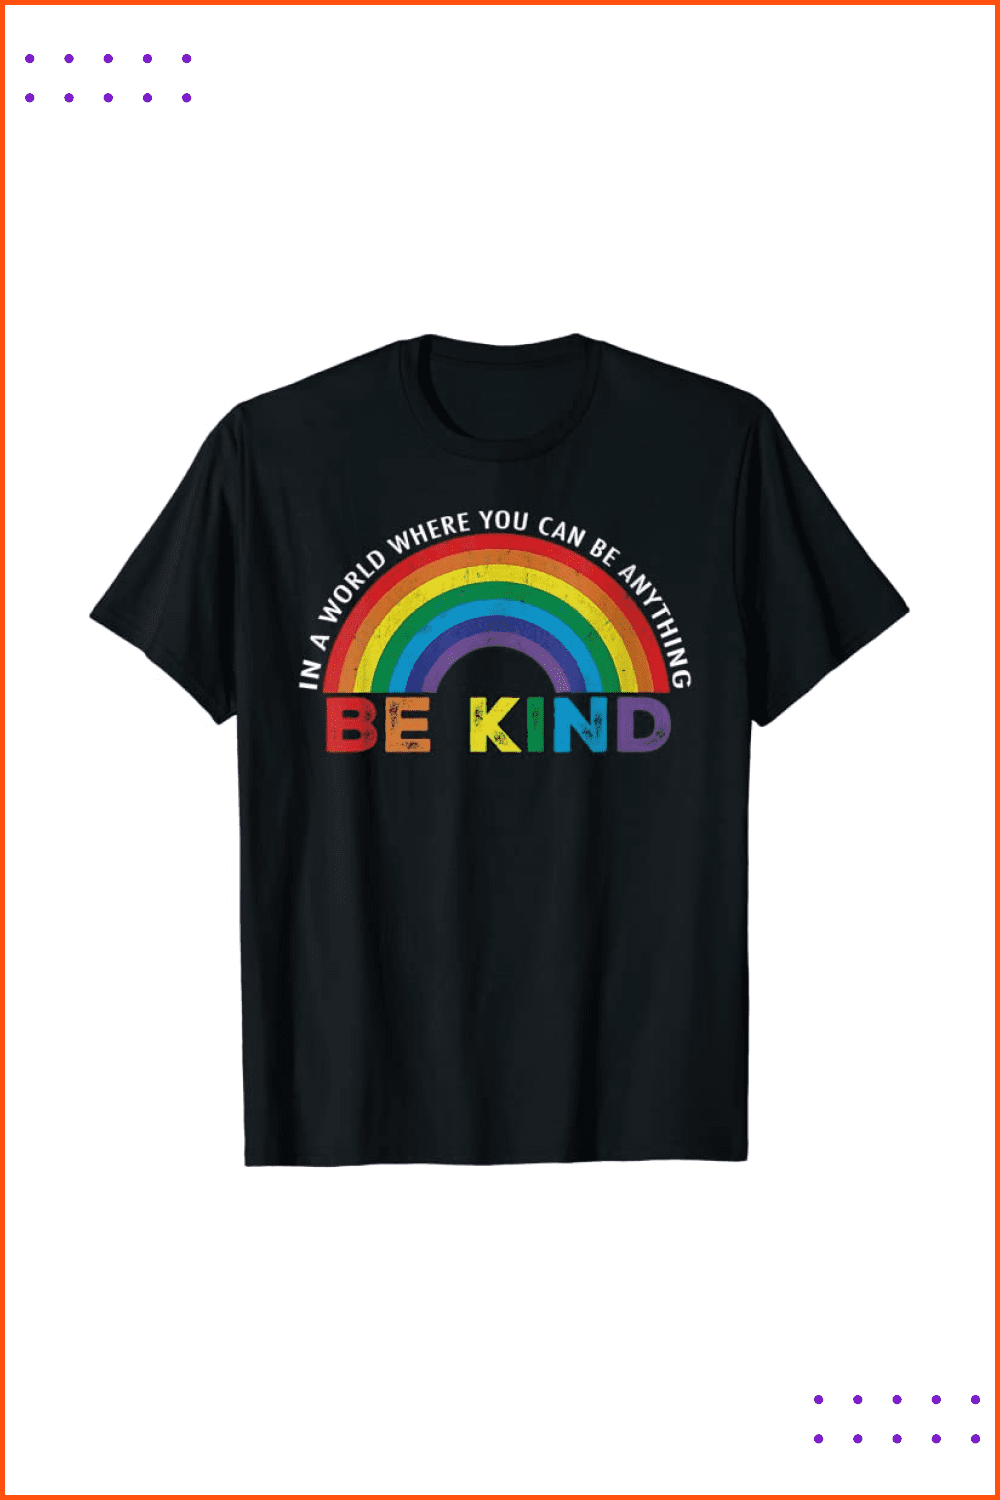 Black T-shirt with a semicircular rainbow and an inscription on it.